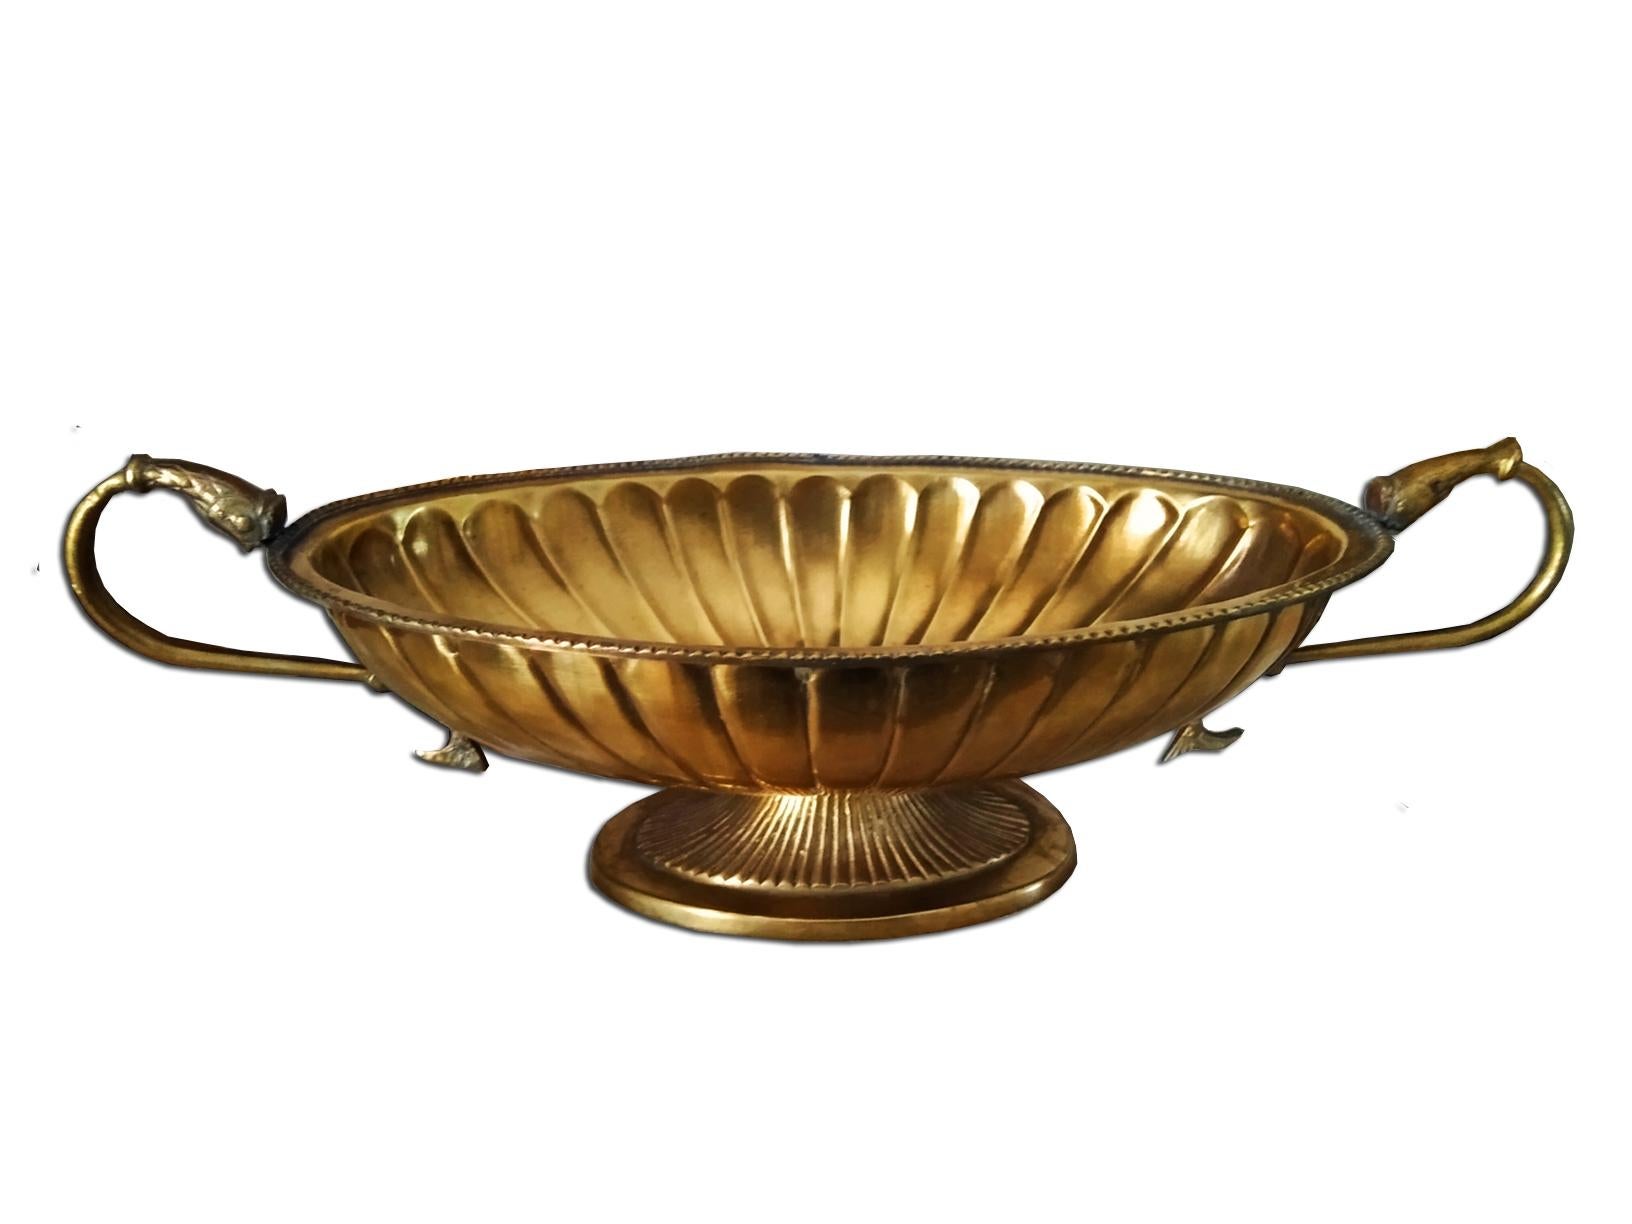  Gold Brass Centerpiece Oval With Neoclassical Grooves and Two Handl Style Form  For Sale 5